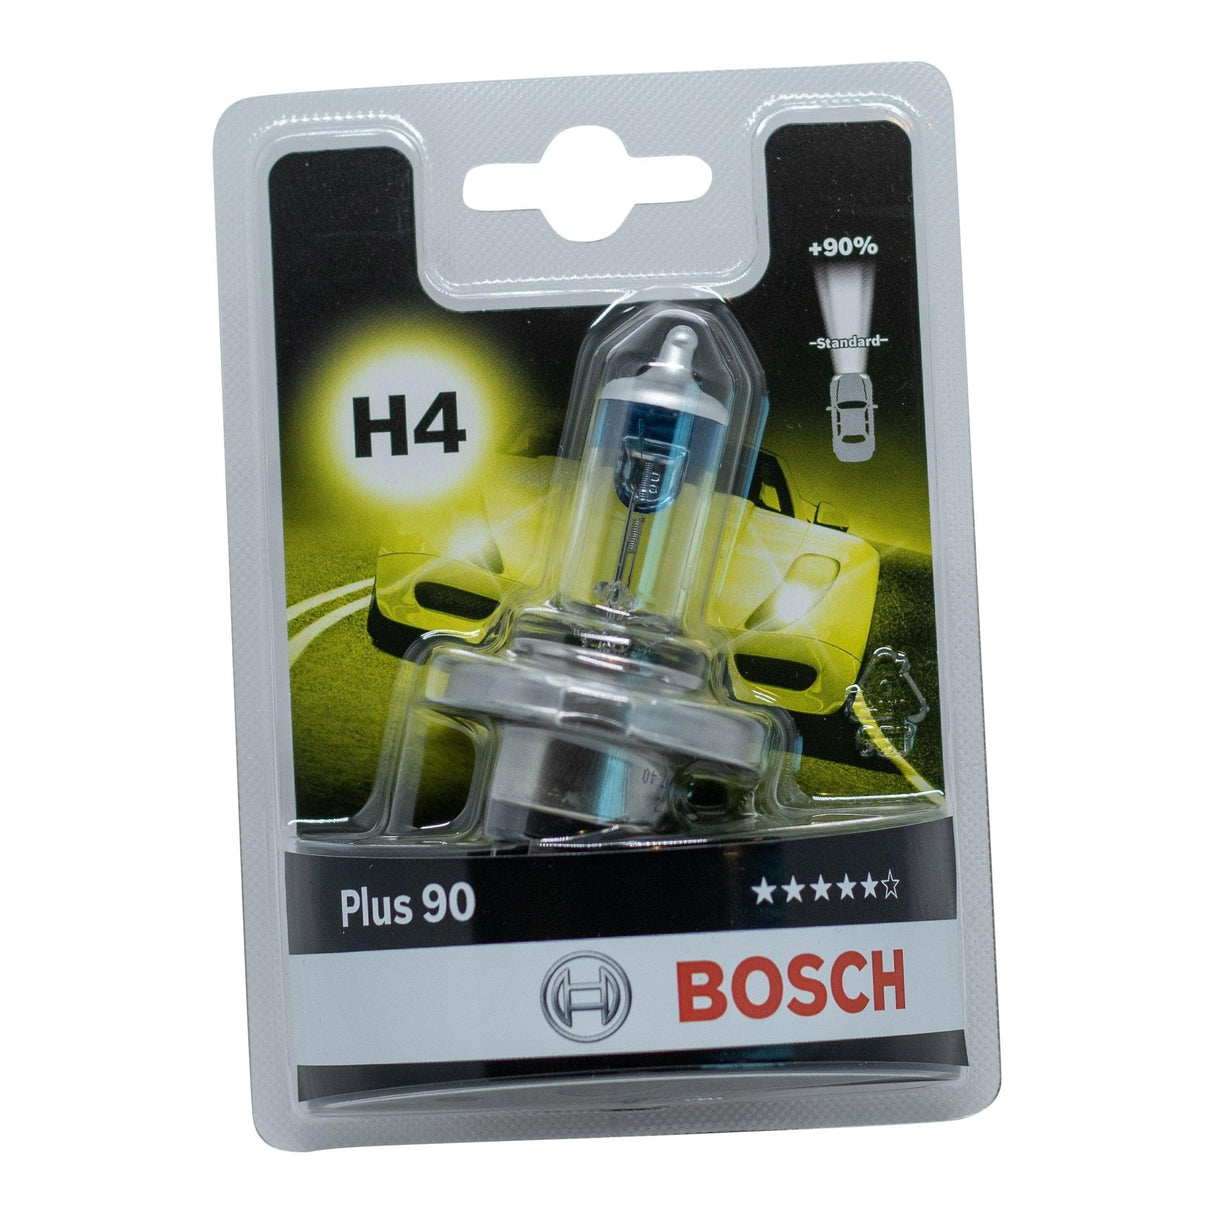 Bosch Plus 90 H4 - Xpert Cleaning